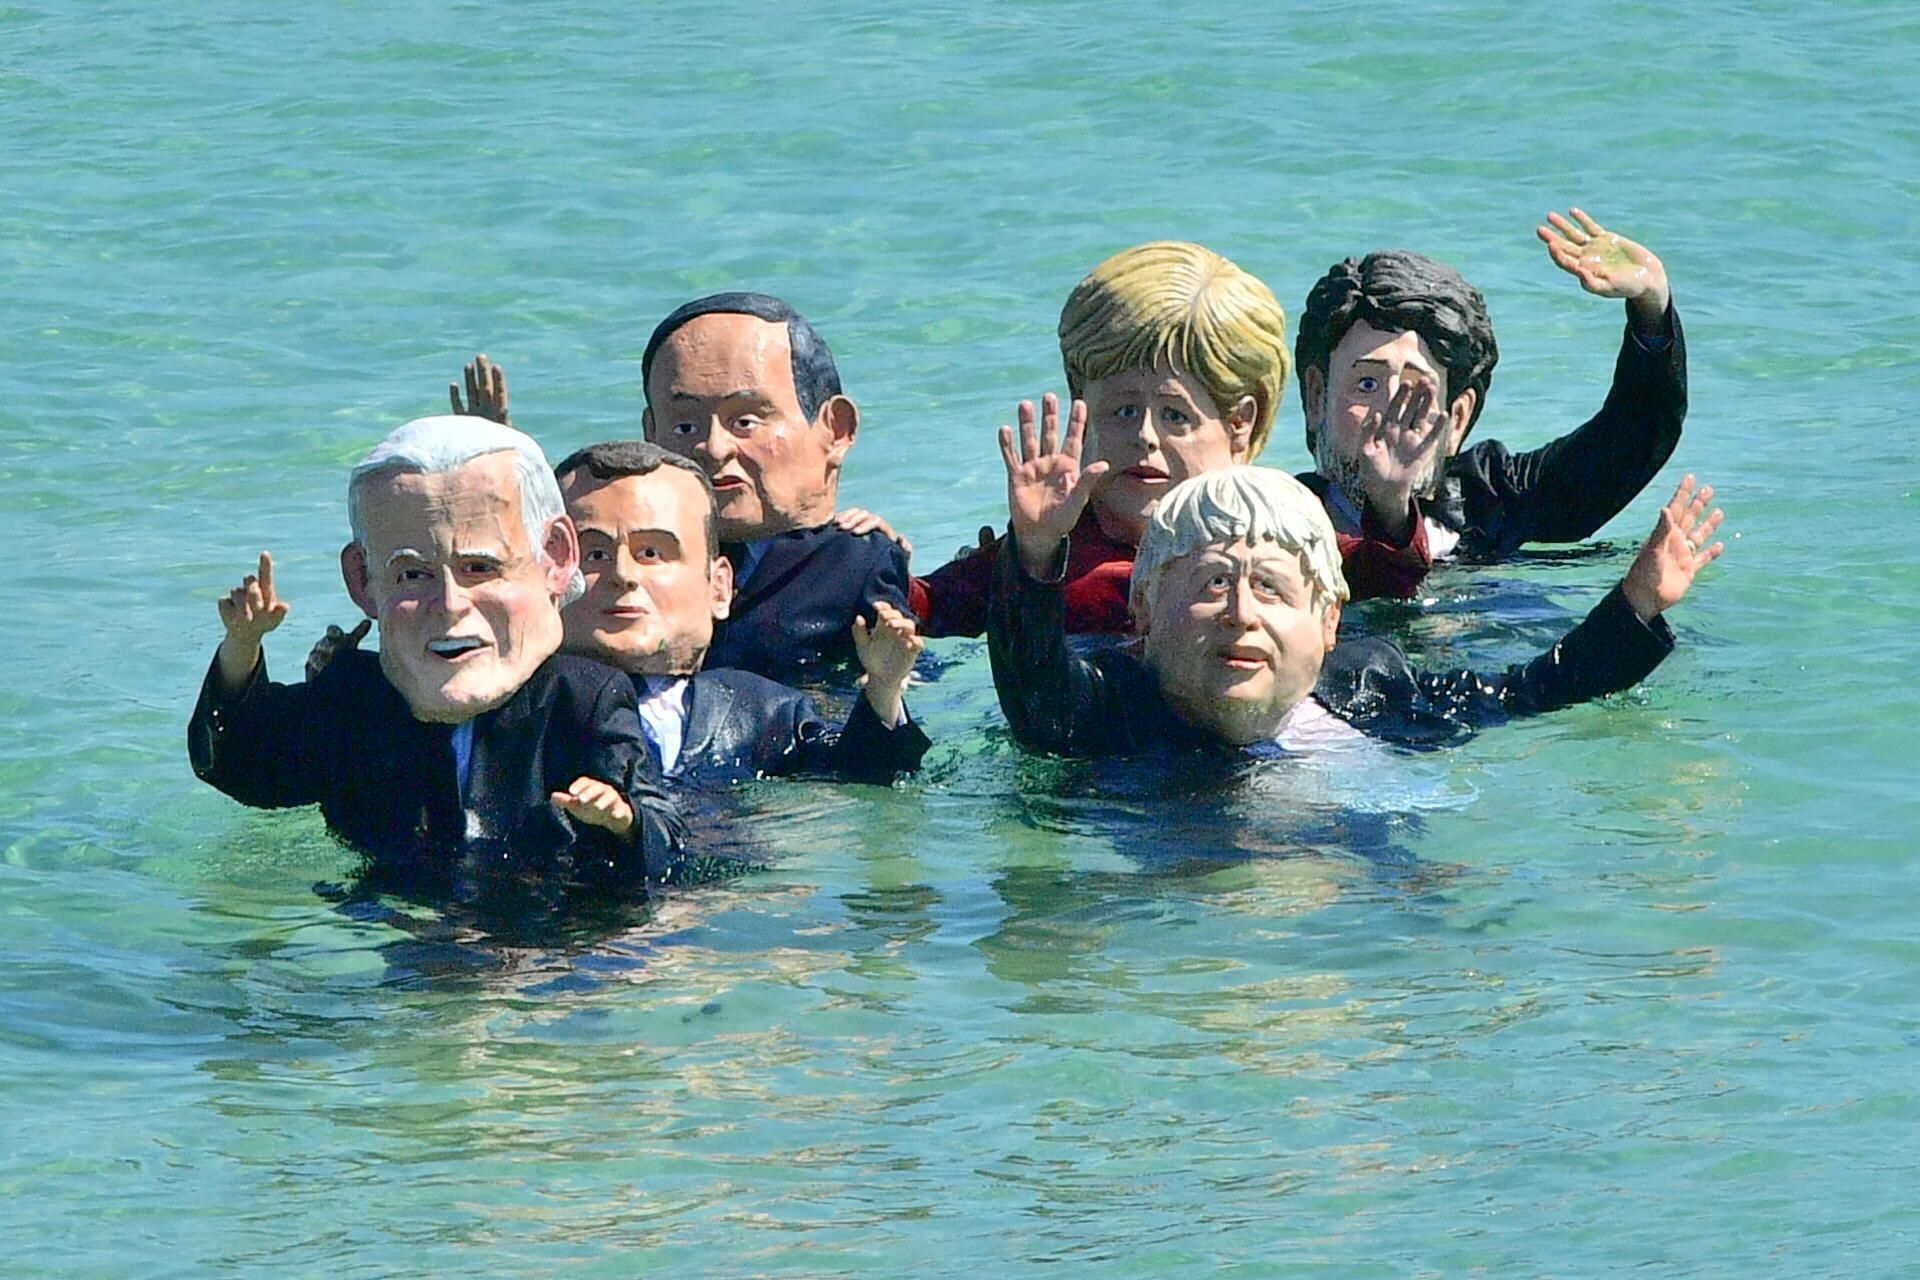 Extinction Rebellion protesters, wearing masks of G7 leaders in the sea in St Ives, during the G7 summit in Cornwall on Sunday June 13, 2021. (Photo:B